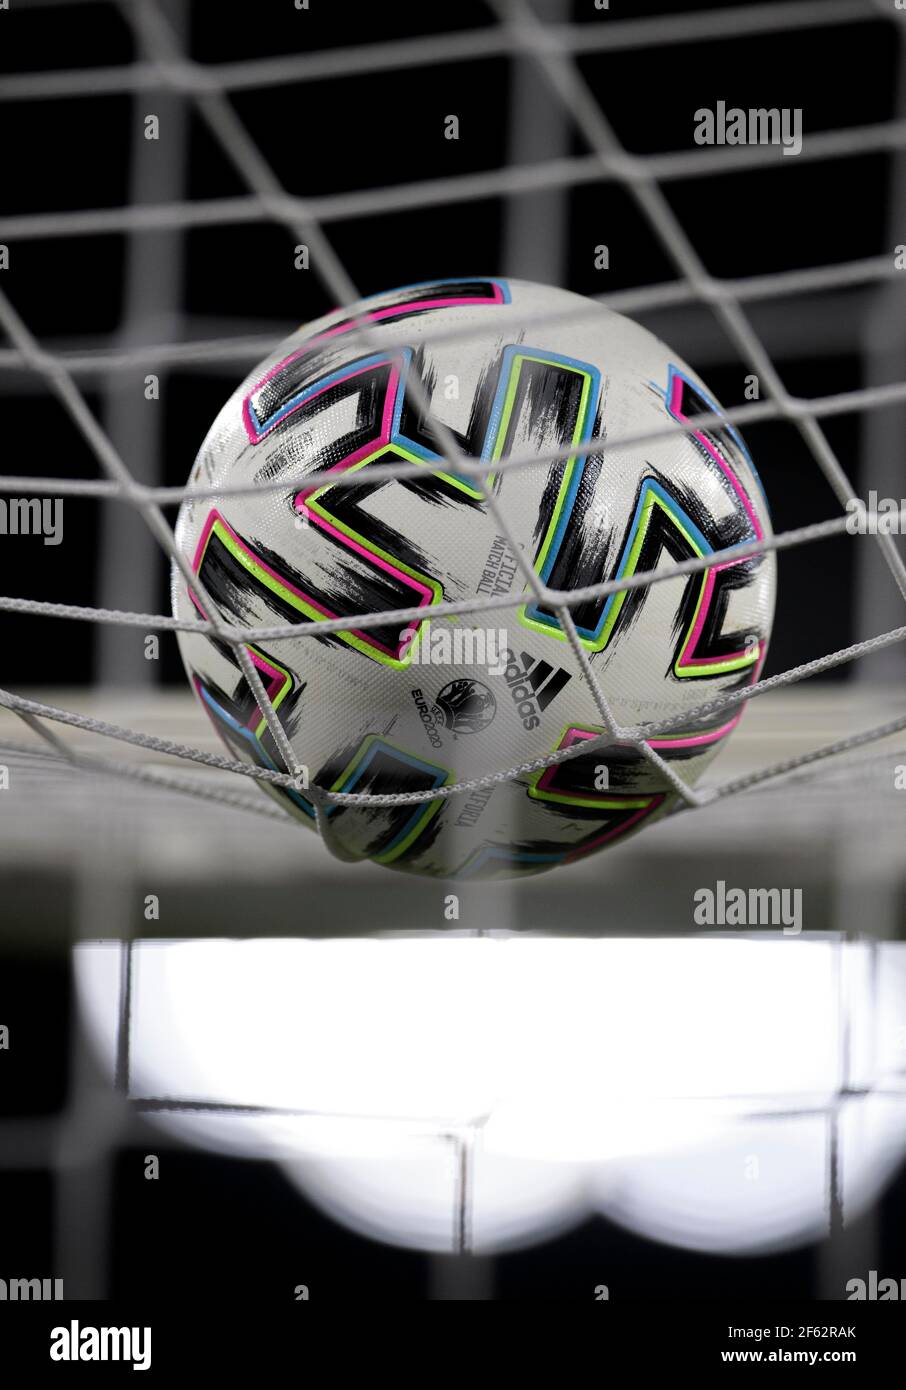 Ball in the goal net, match ball, Adidas, Euro2020, Soccer Laenderspiel,  World Cup qualification group J